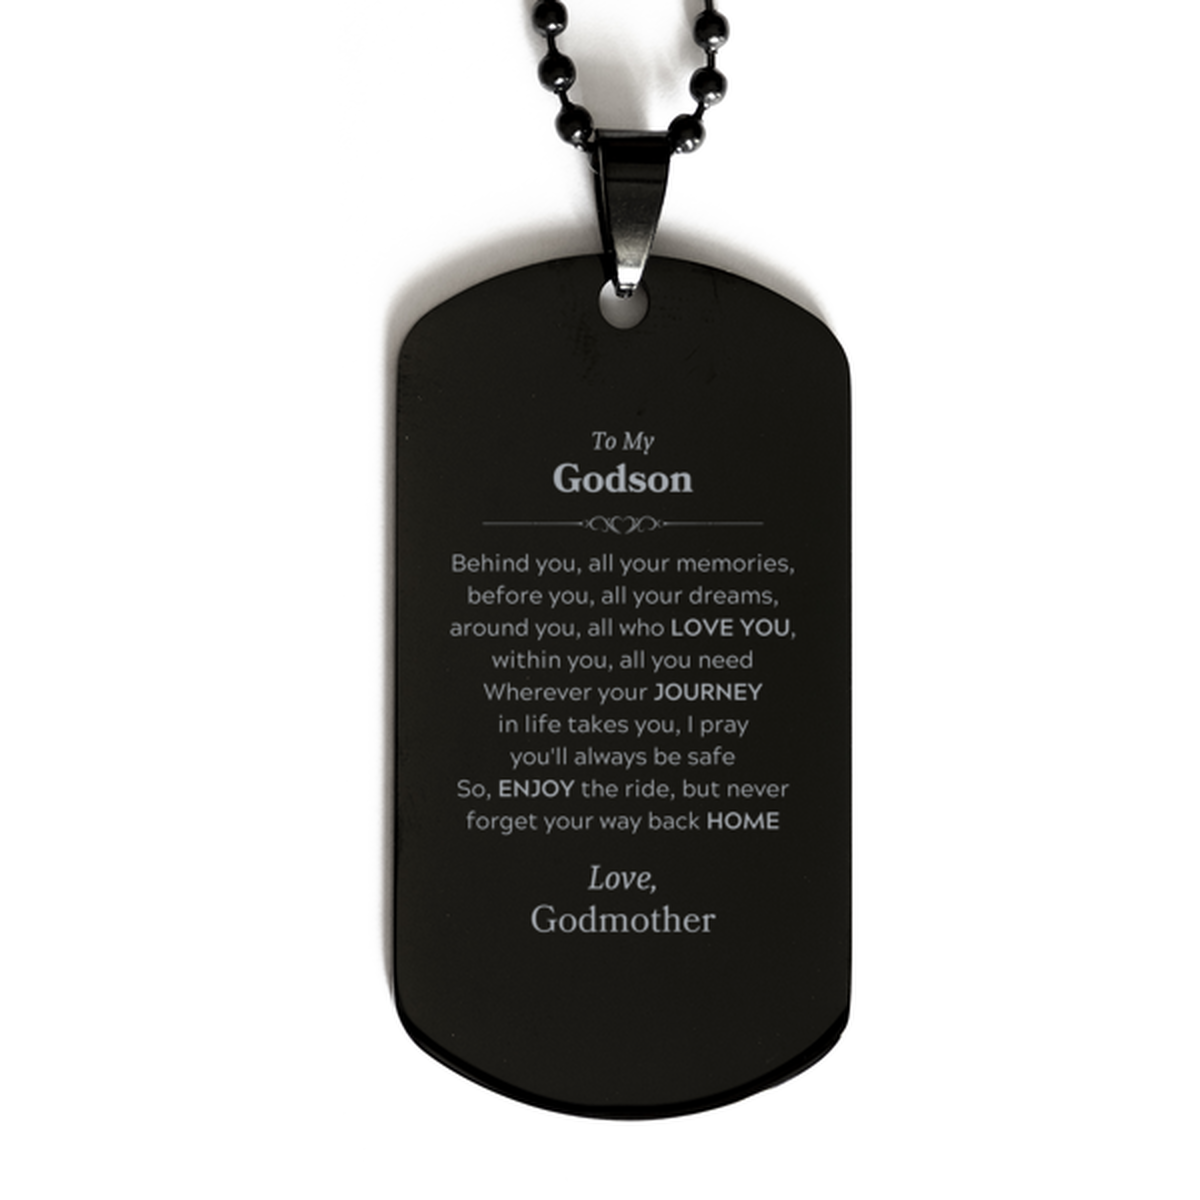 To My Godson Graduation Gifts from Godmother, Godson Black Dog Tag Christmas Birthday Gifts for Godson Behind you, all your memories, before you, all your dreams. Love, Godmother